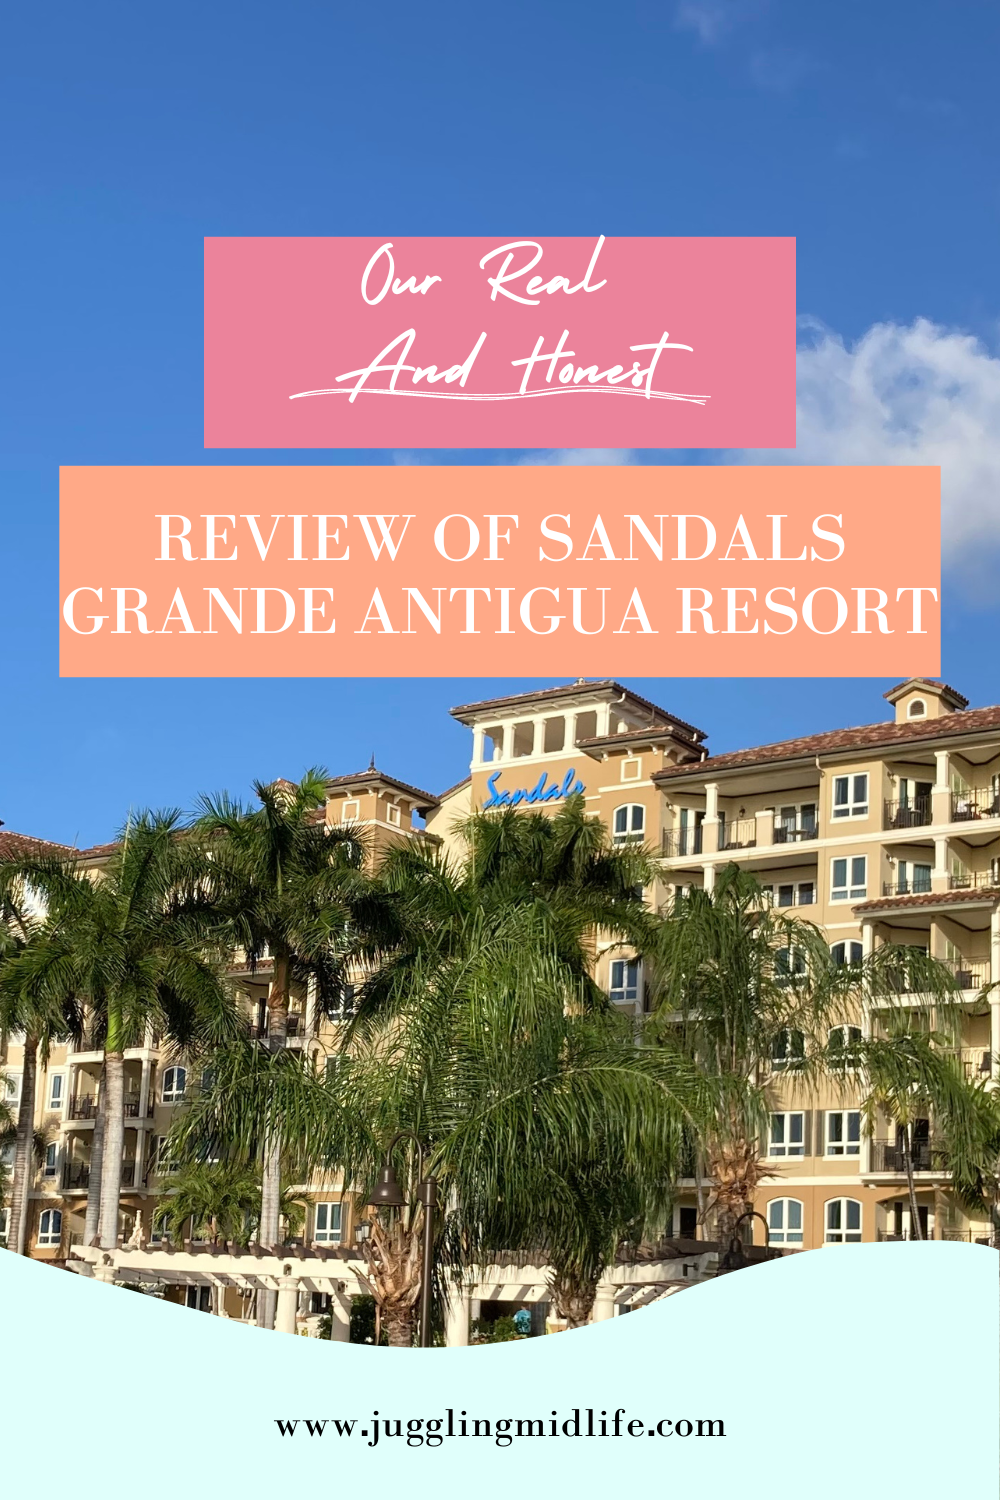 Real and honest review sandals grande antigua